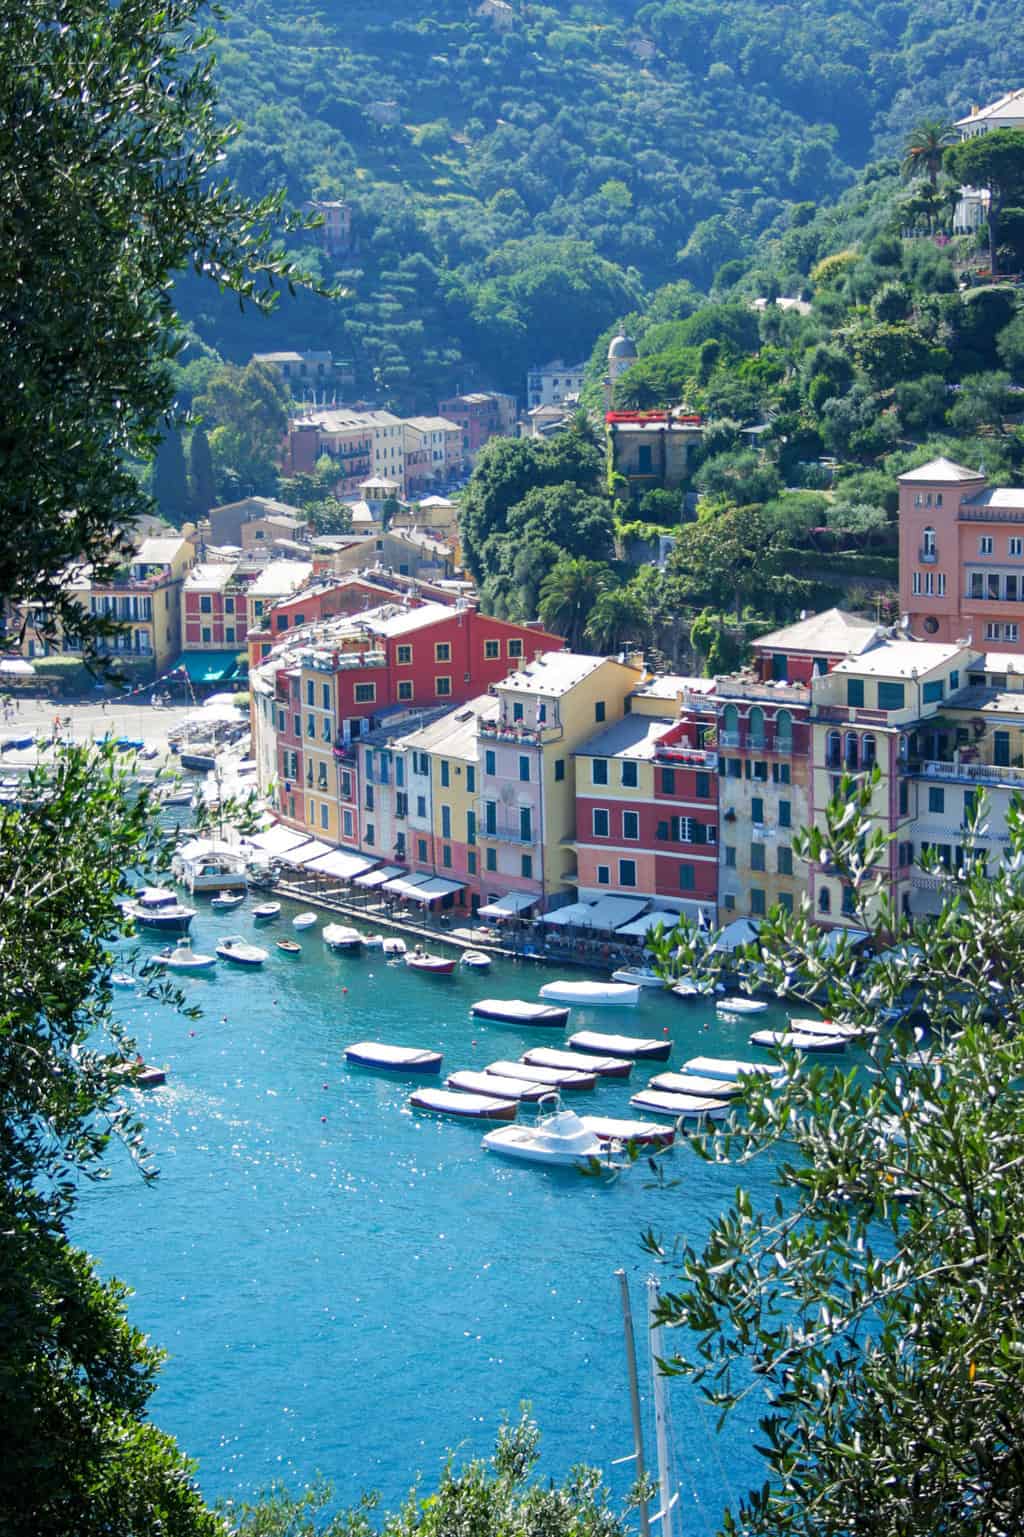 Small boats moored on clear blue water in front of the colourful village of Portofino.